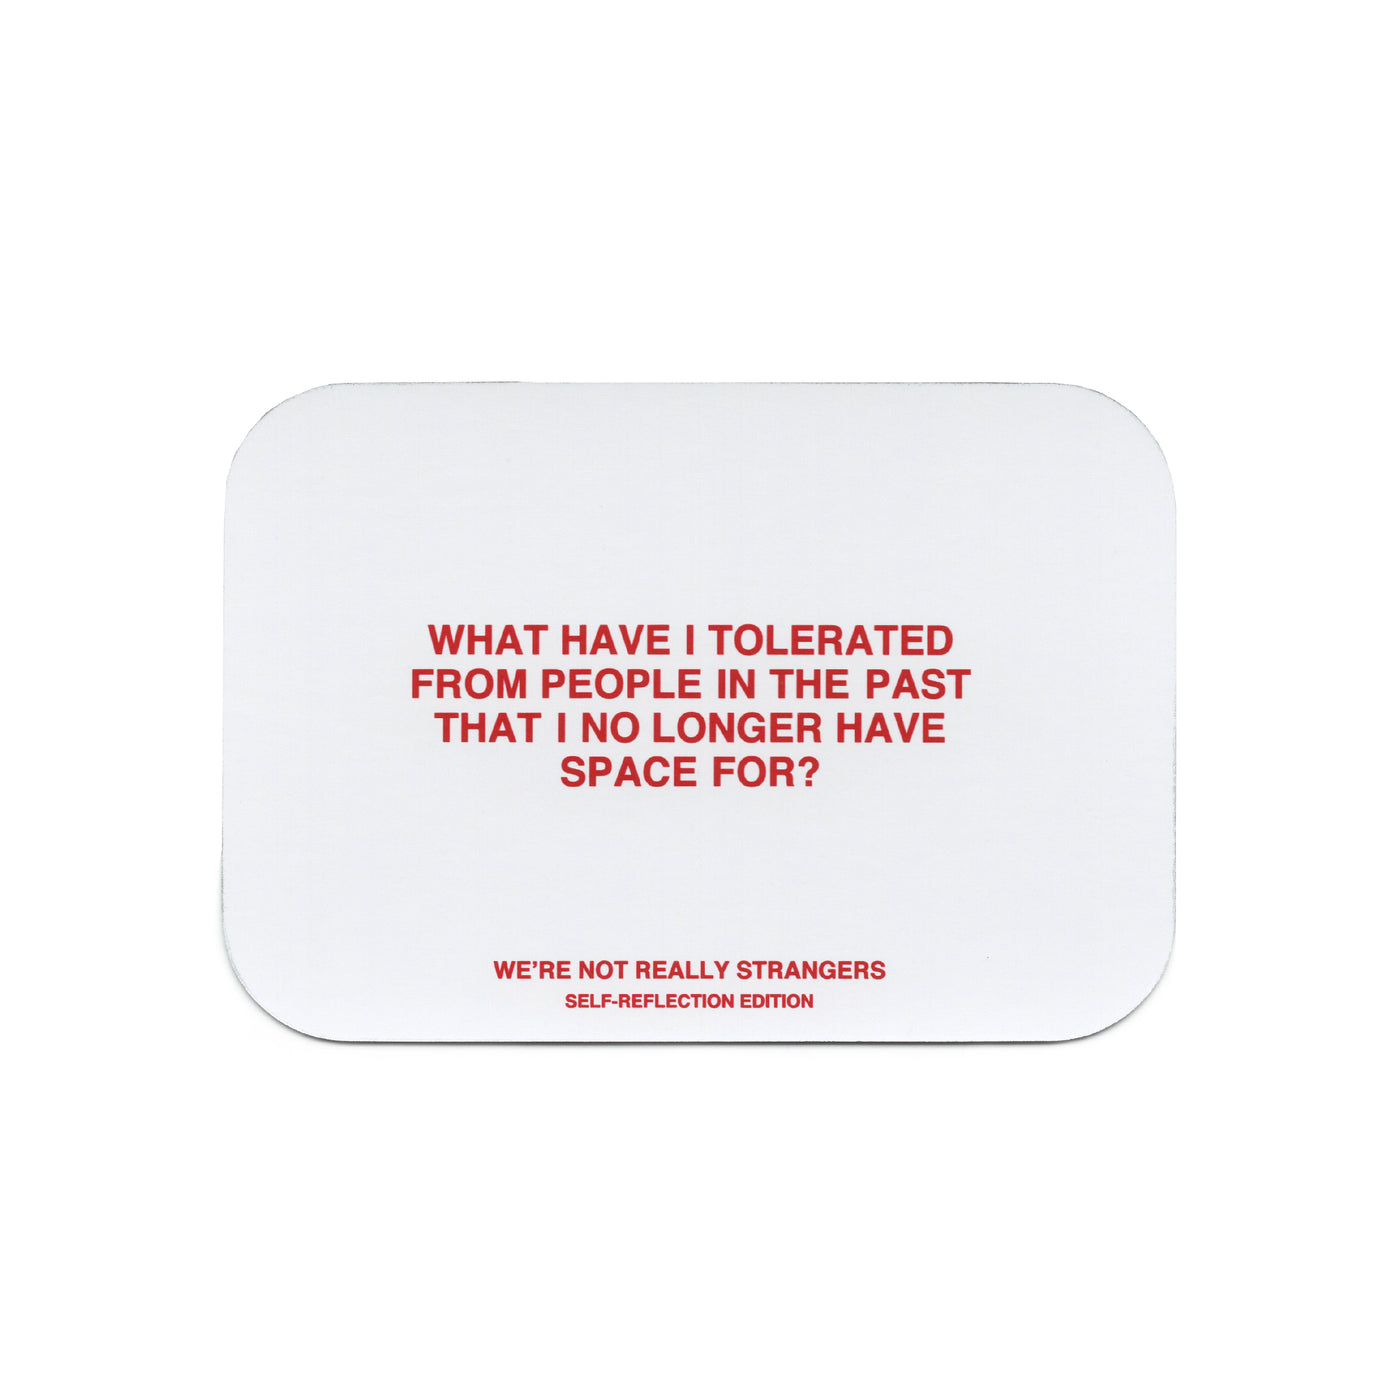 We're Not Really Strangers Self-Reflection Kit card reading "What have I tolerated from people in the past that I no longer have space for?"